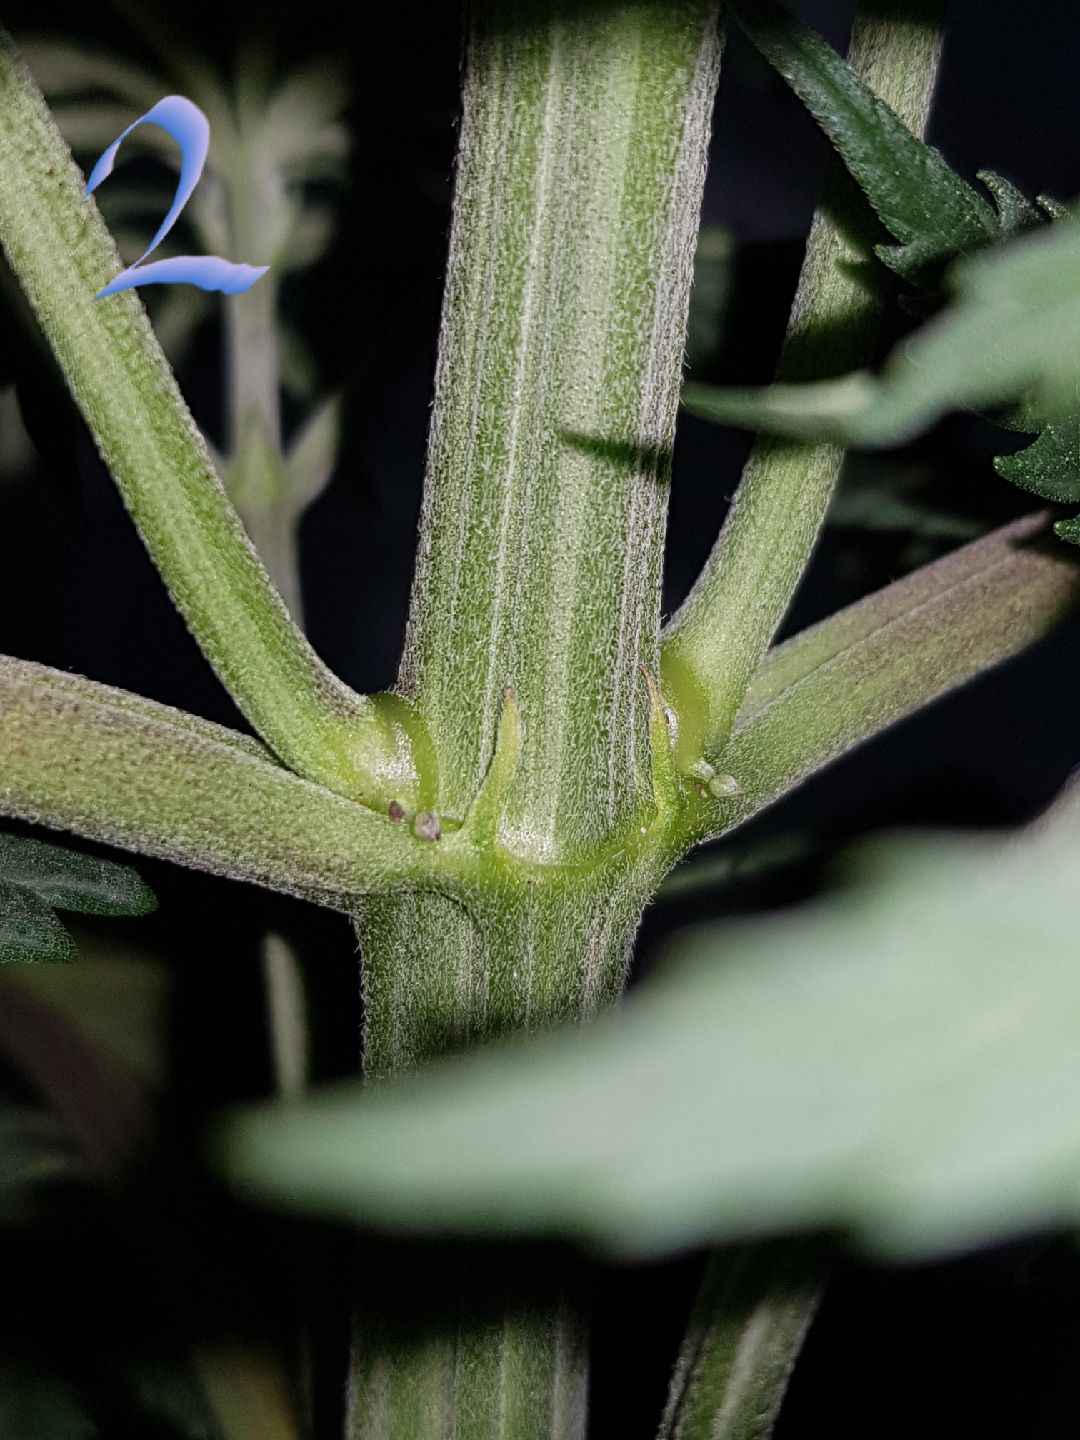 Checking the plants genders   advice appreciated 2